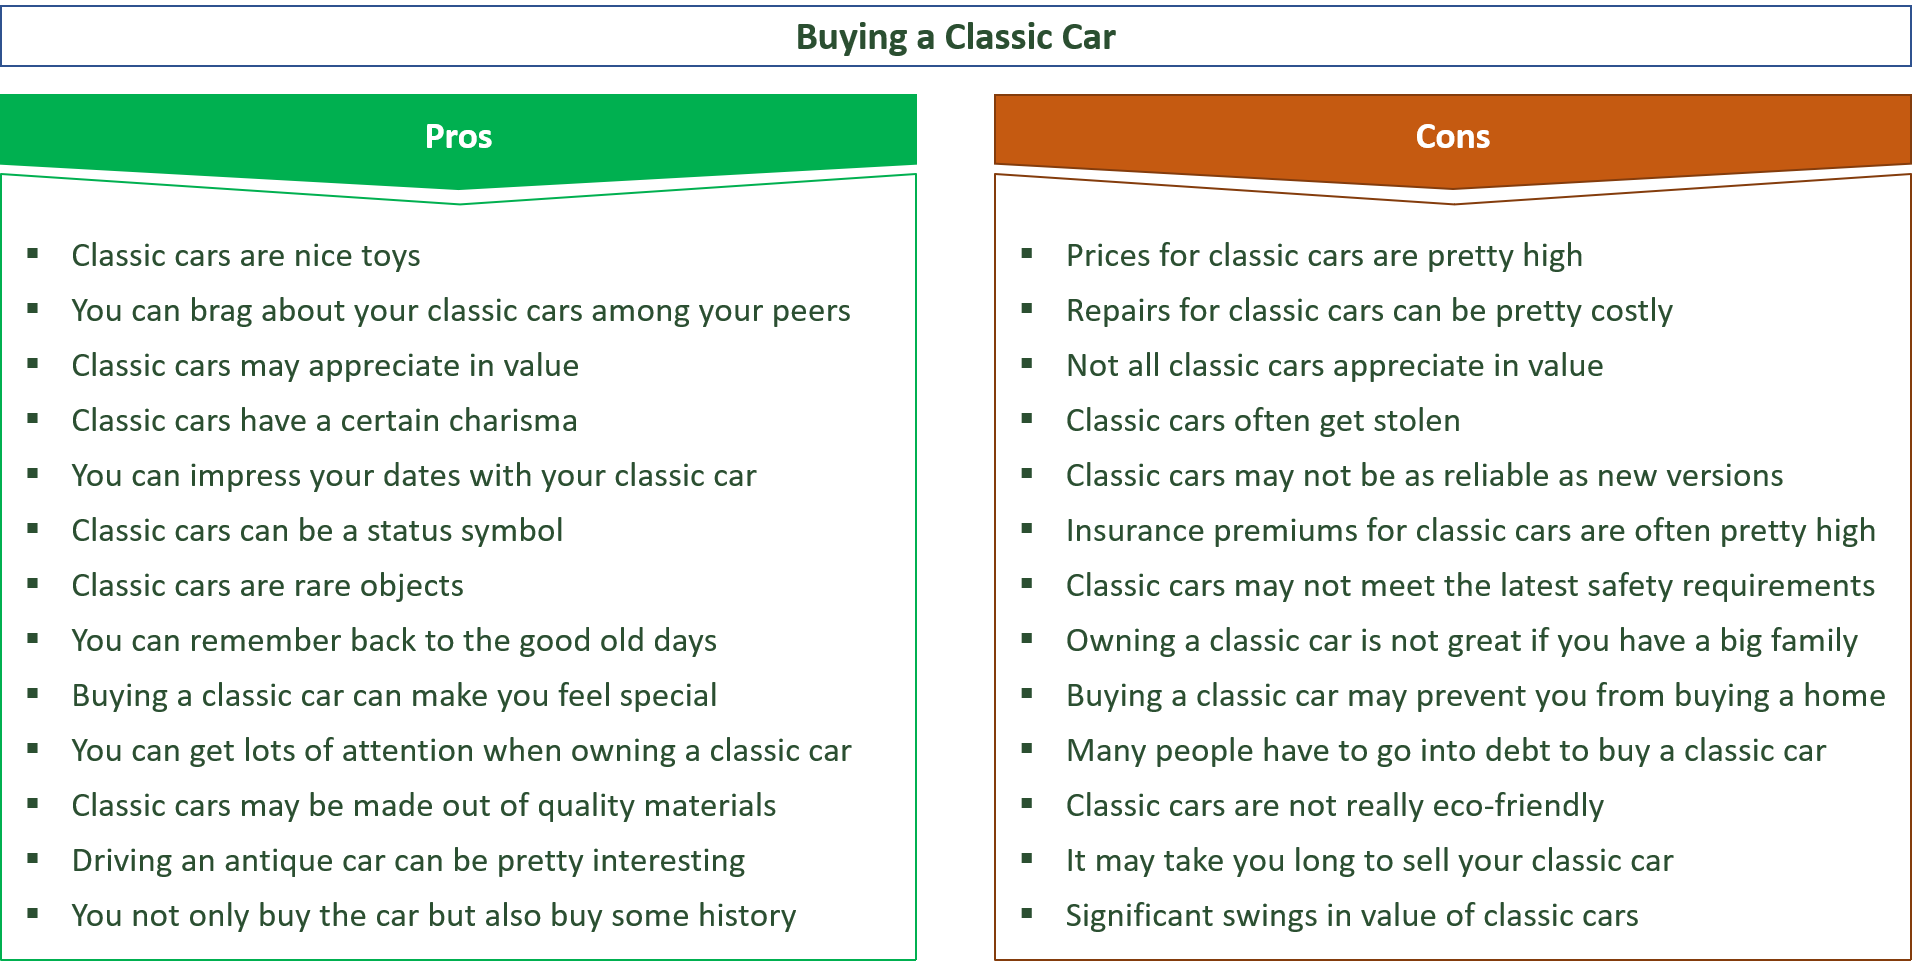 advantages and disadvantages of buying a classic car